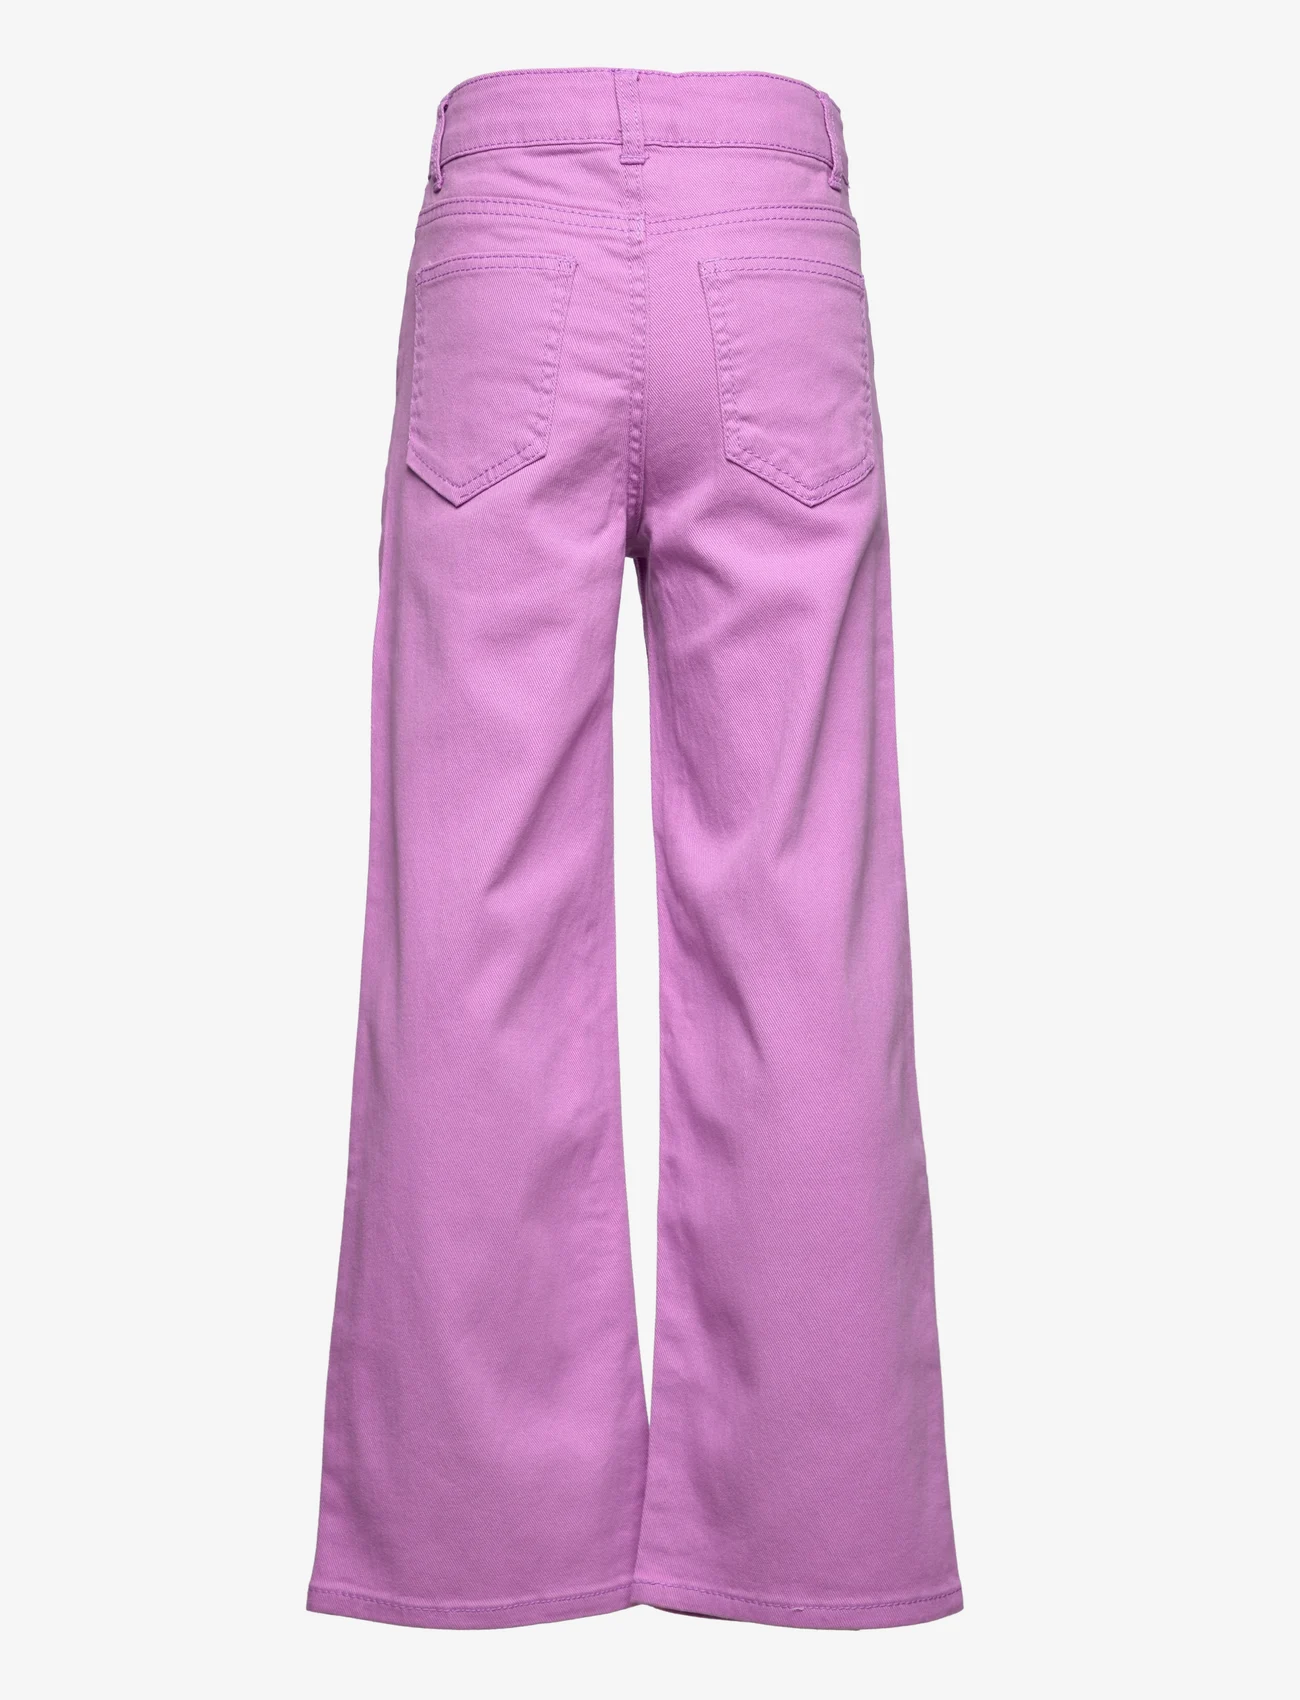 LMTD - NLFTAZZA TWI HW WIDE PANT - wide leg jeans - pale pansy - 1